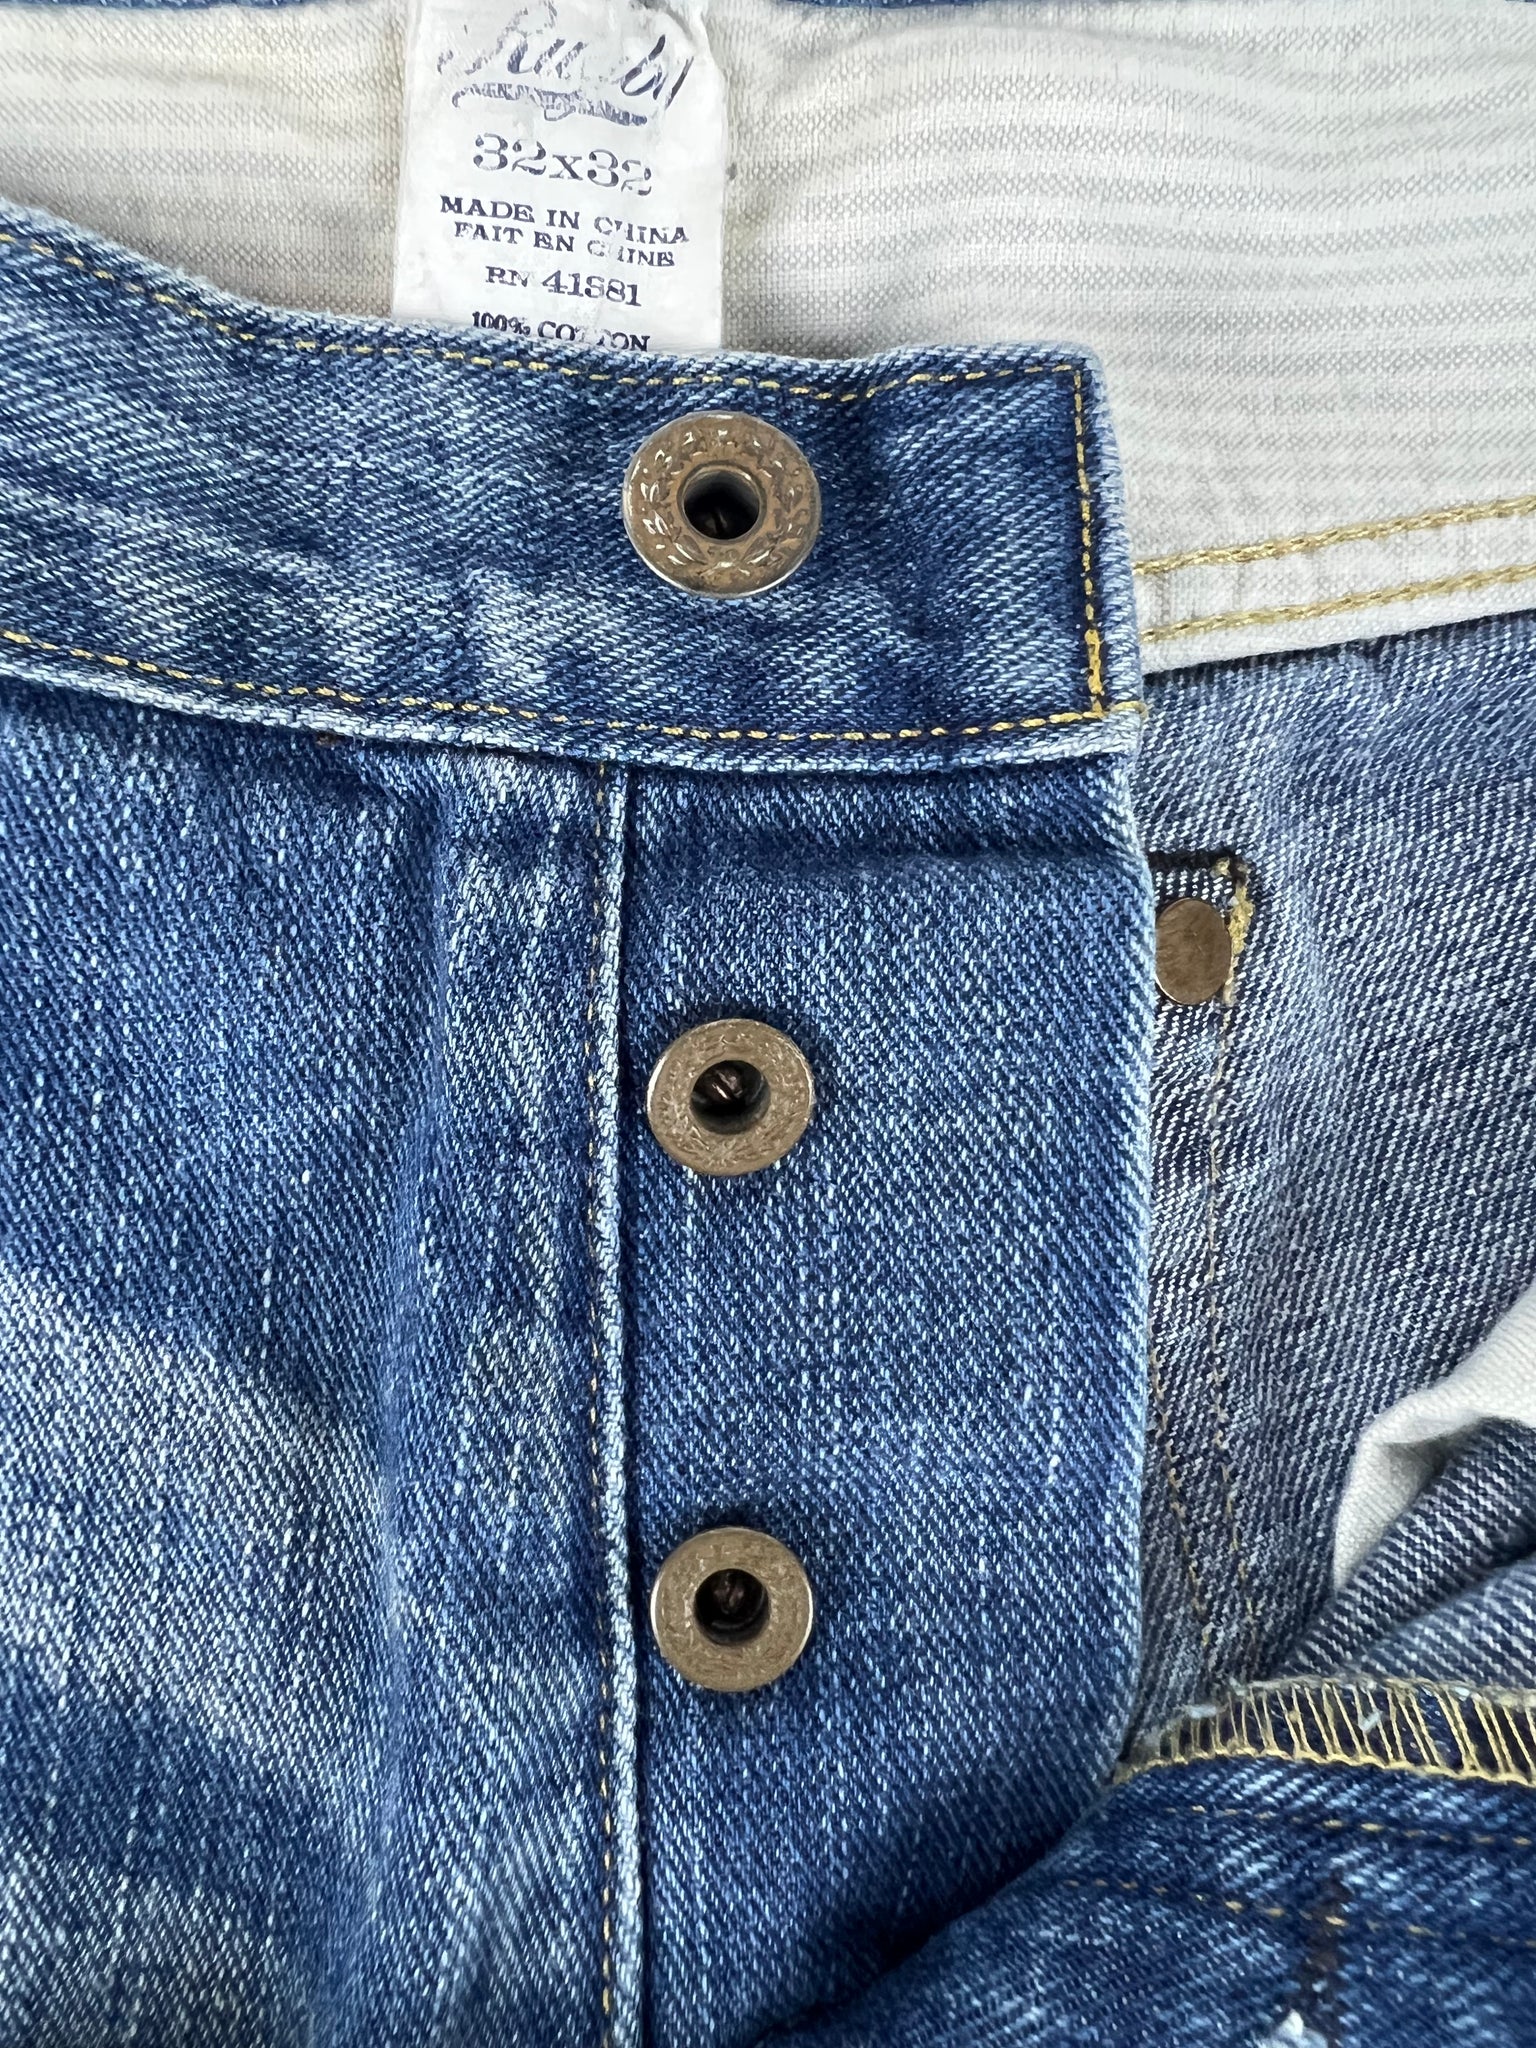 Ralph Lauren Rugby distressed button fly jeans 32x32”